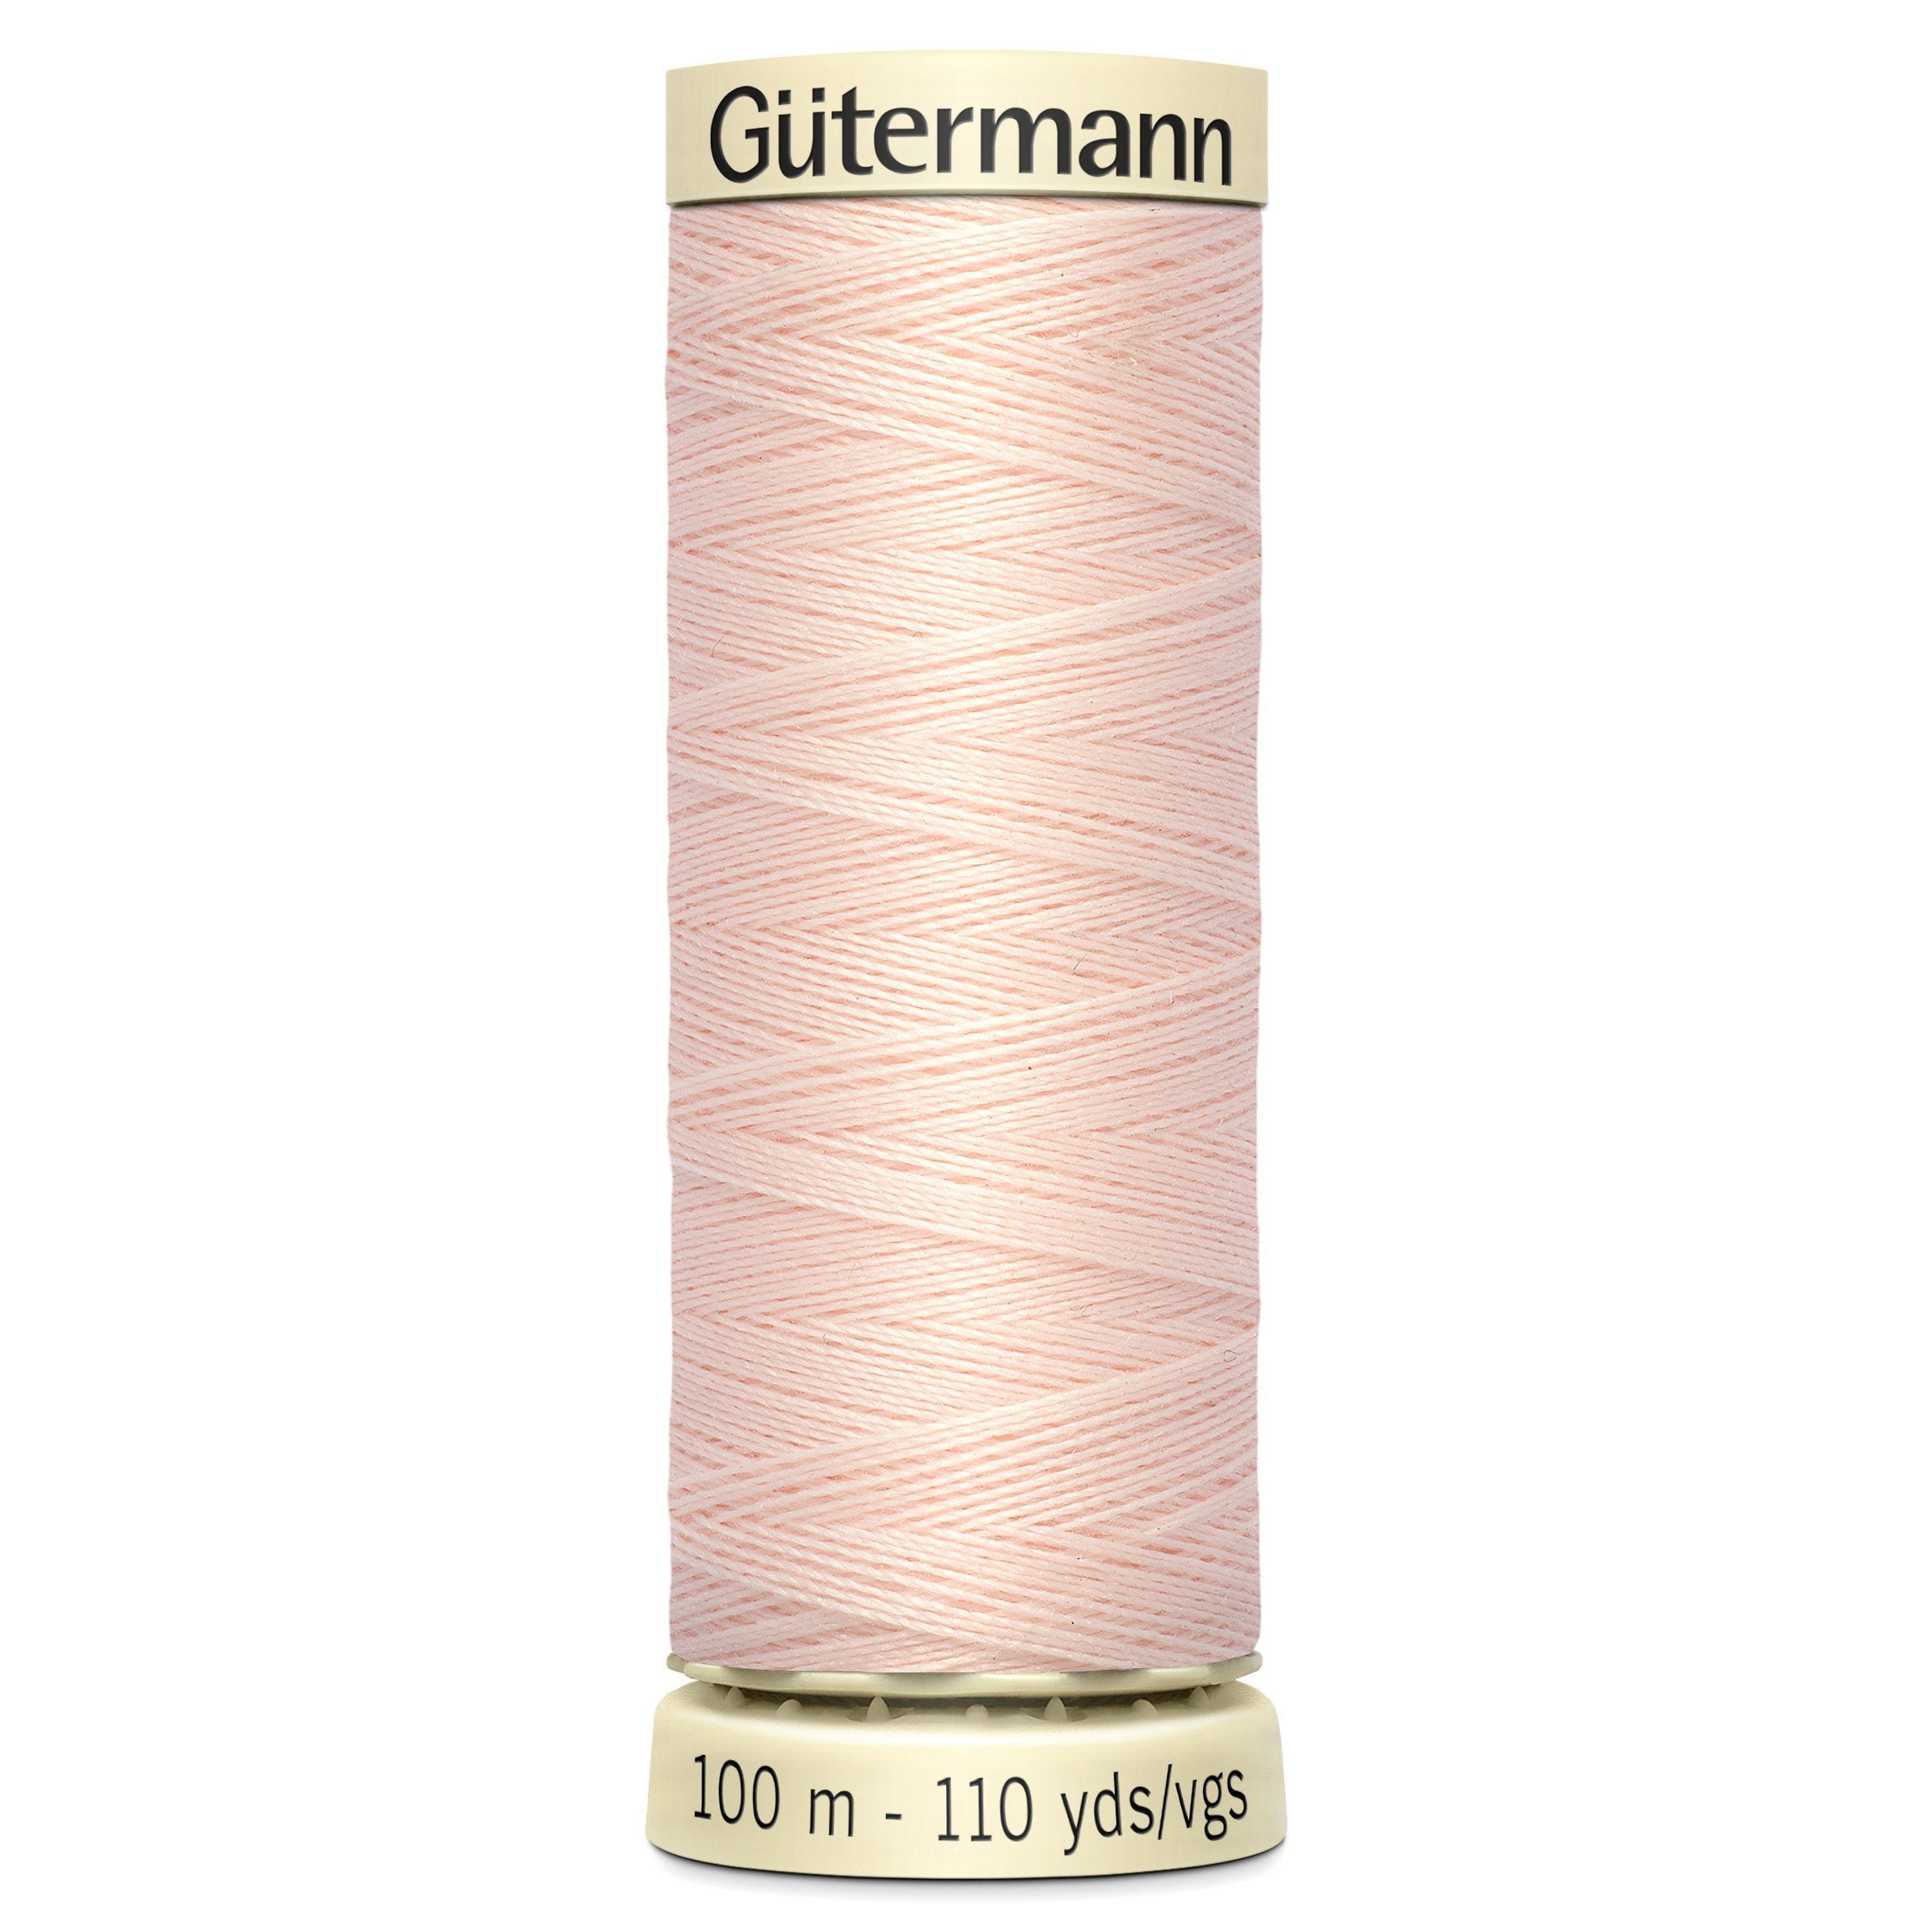 Gutermann Sew-All Polyester Sewing Thread 210 Pink from Jaycotts Sewing Supplies